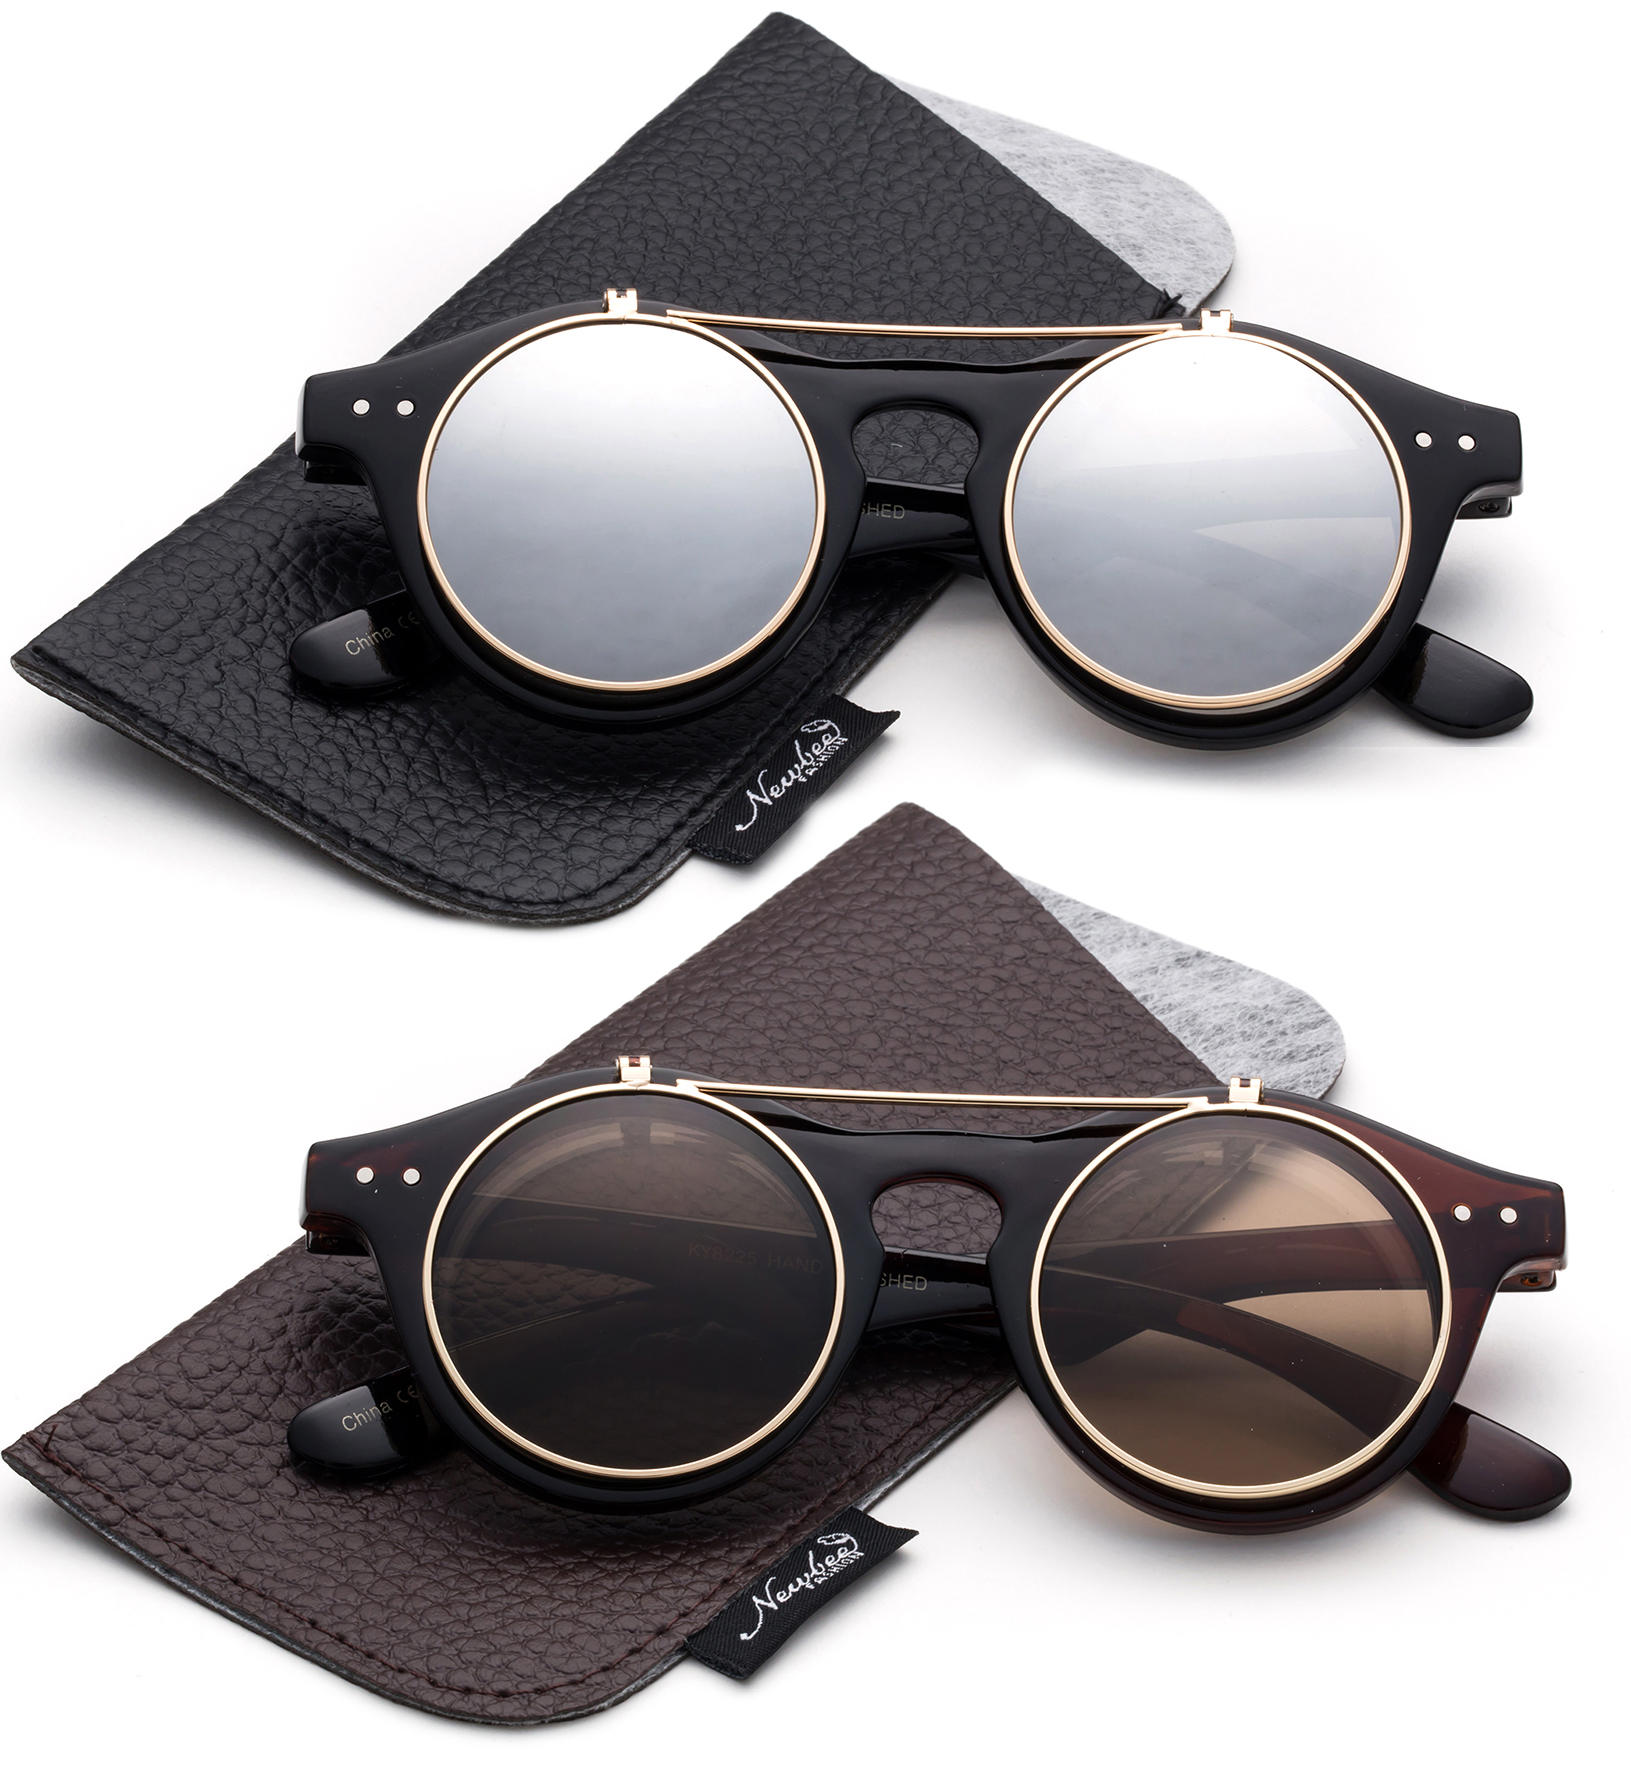 Classic Small Retro Steampunk Circle Flip Up Glasses / Sunglasses Cool Retro New Model-2 Pairs w/Pouch - image 1 of 1